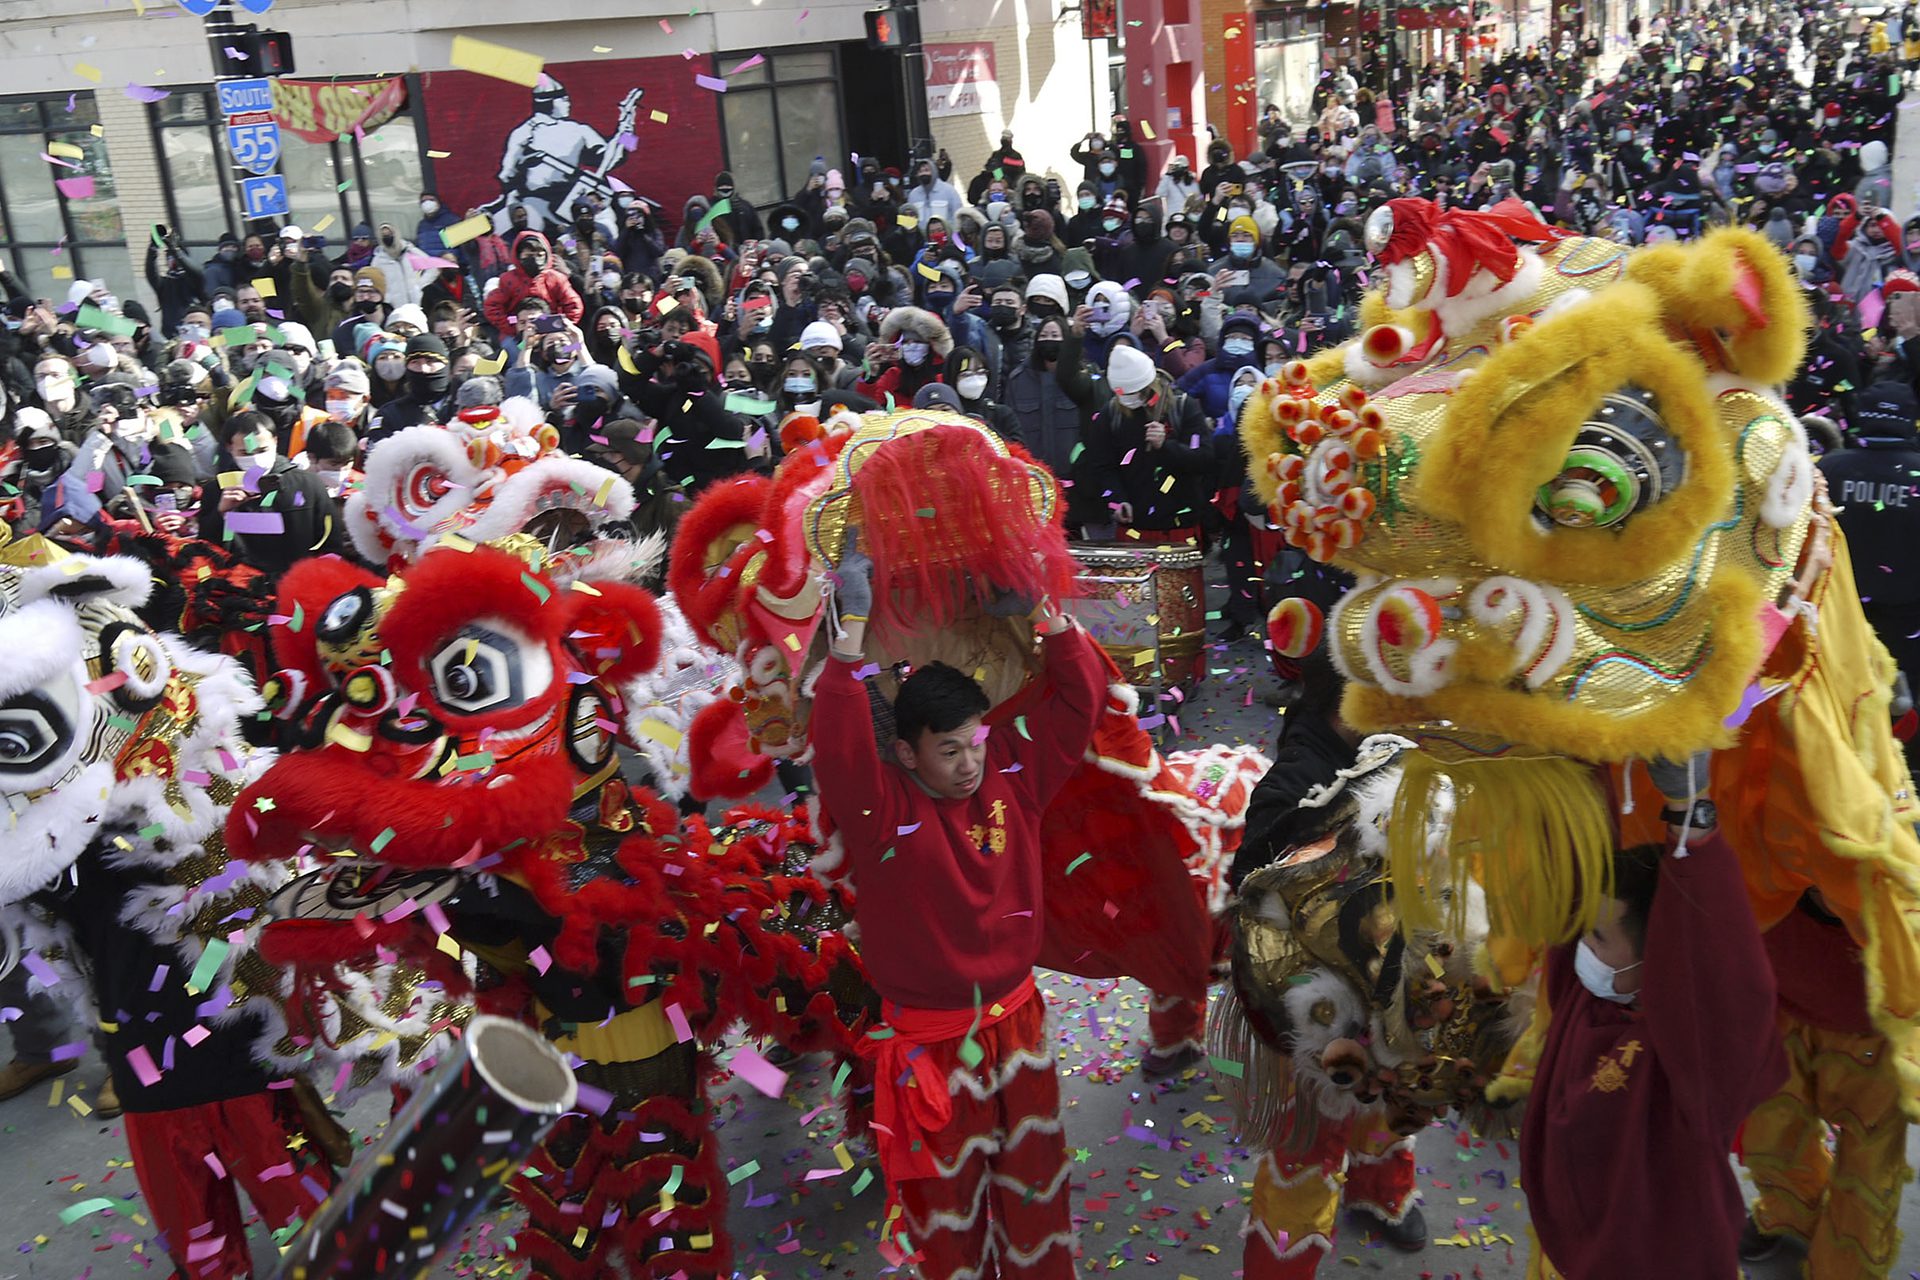 hundreds fill the streets with confetti in the air and a several people with dragon costumes in the foreground